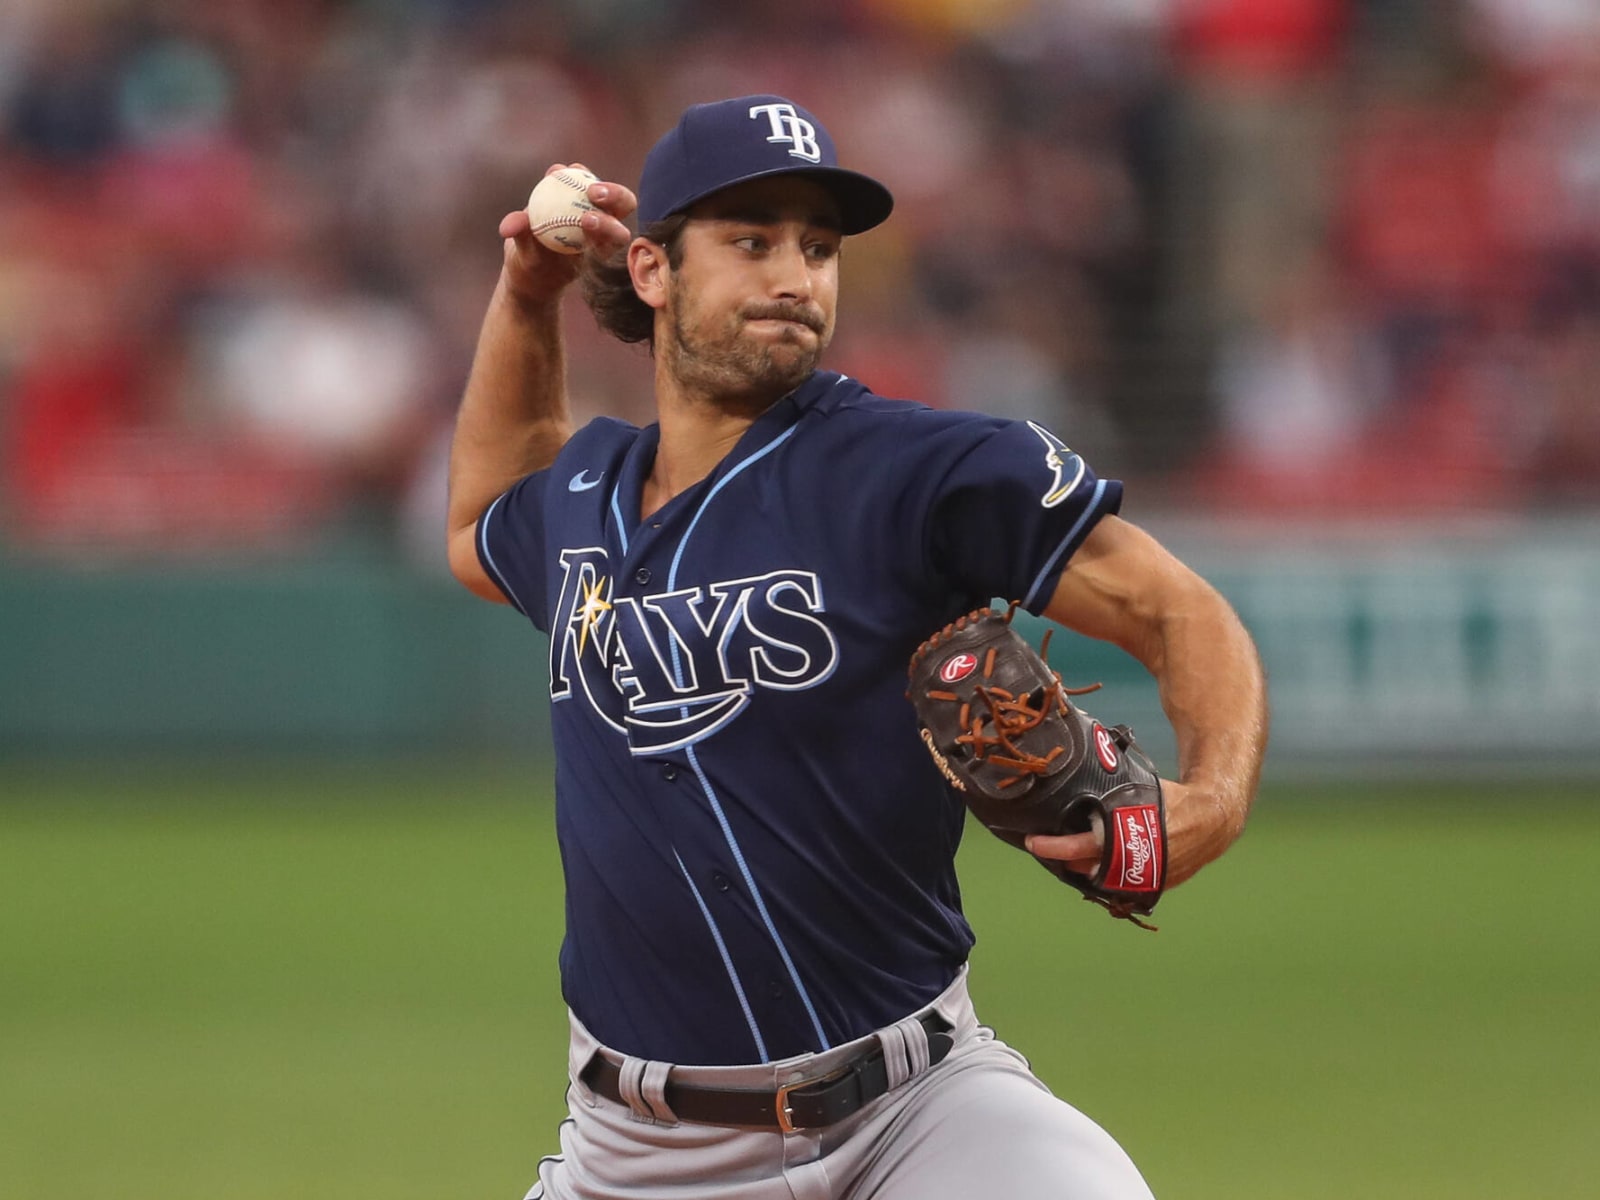 Tampa Bay Rays' JT Chargois pitches to the Toronto Blue Jays